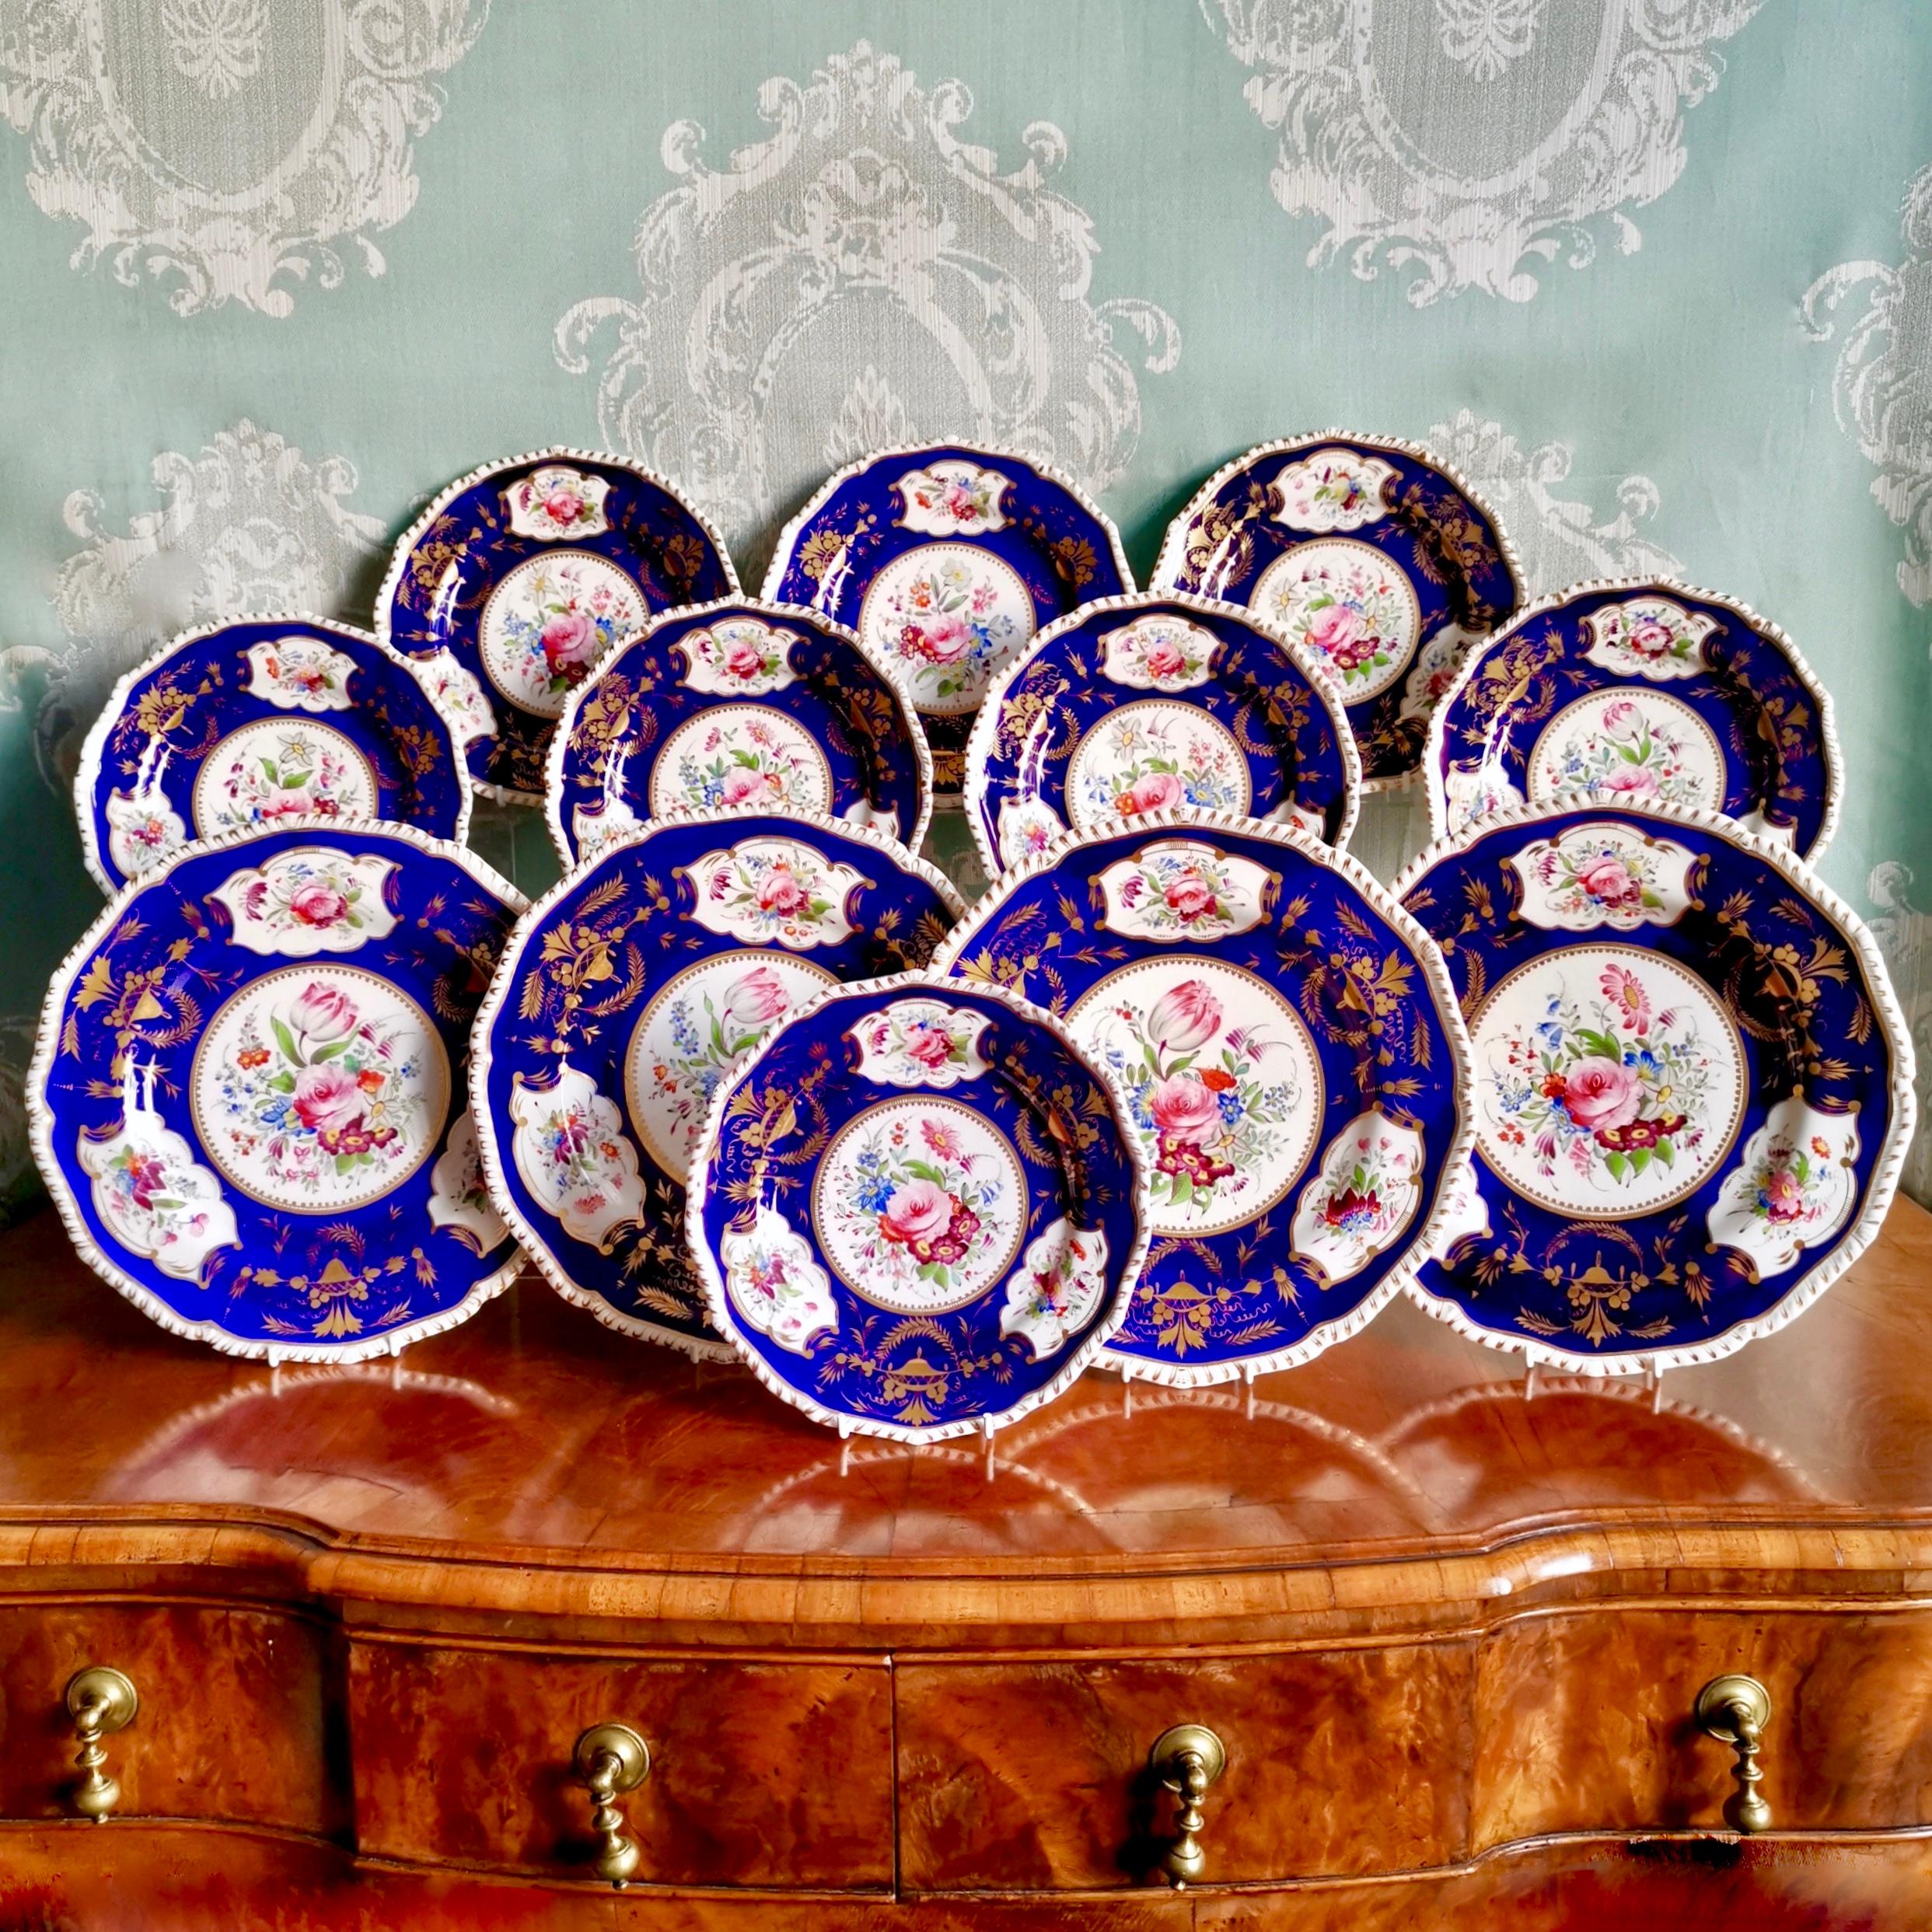 This is a set of 8 dessert plates made by Bloor Derby between 1825 and 1830.

I have a matching set of four dinner plates in the same pattern available (see second picture).

The Derby Porcelain Company, later called Royal Crown Derby, is currently